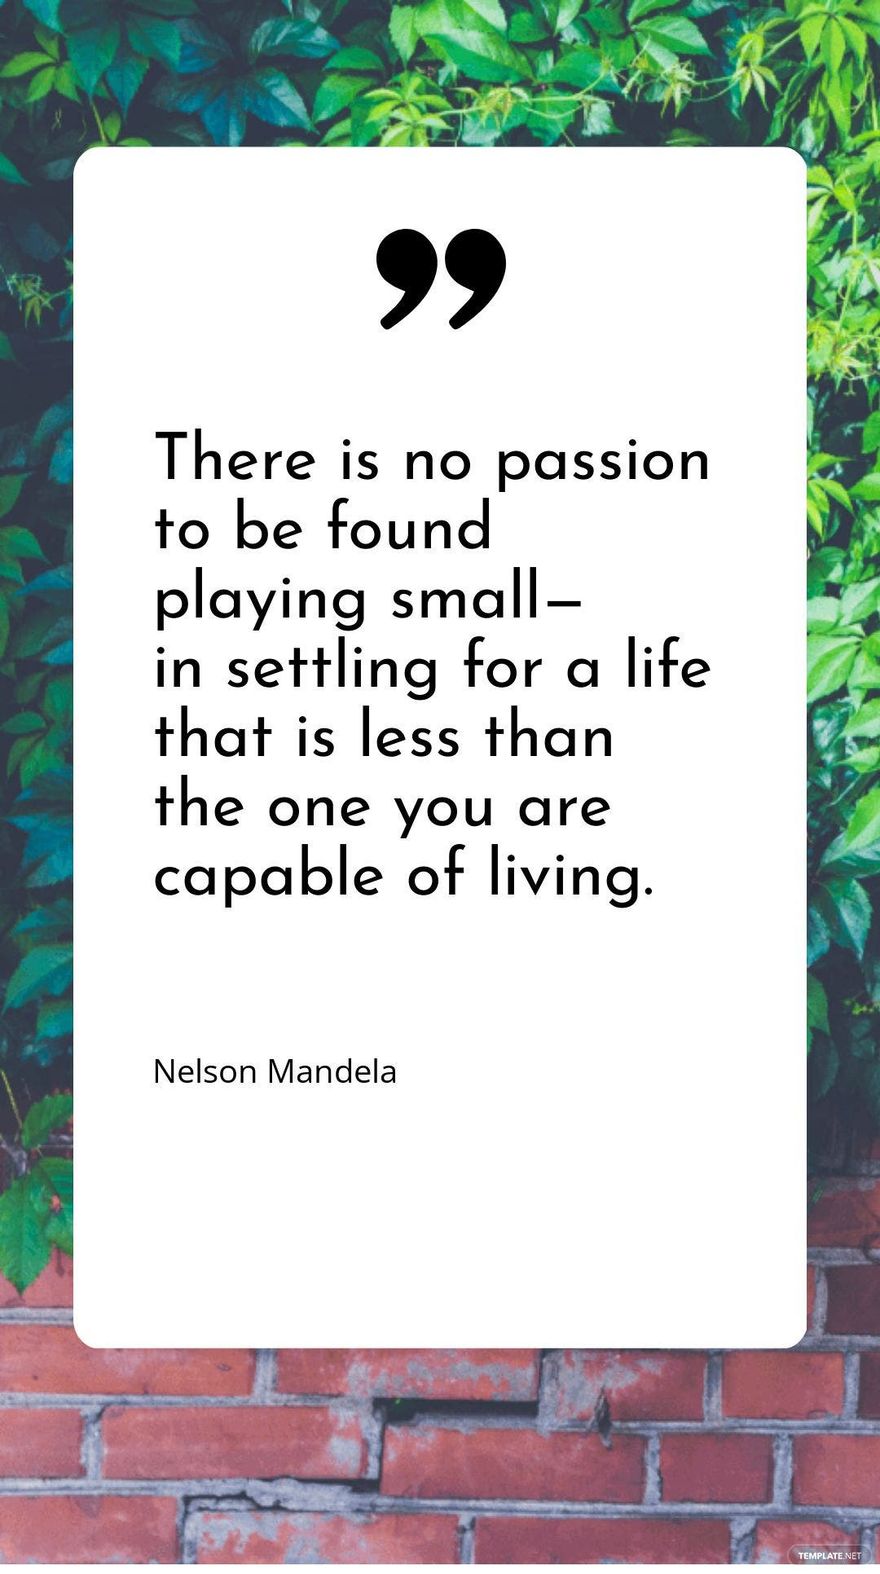 Nelson Mandela - There is no passion to be found playing small - in settling for a life that is less than the one you are capable of living.